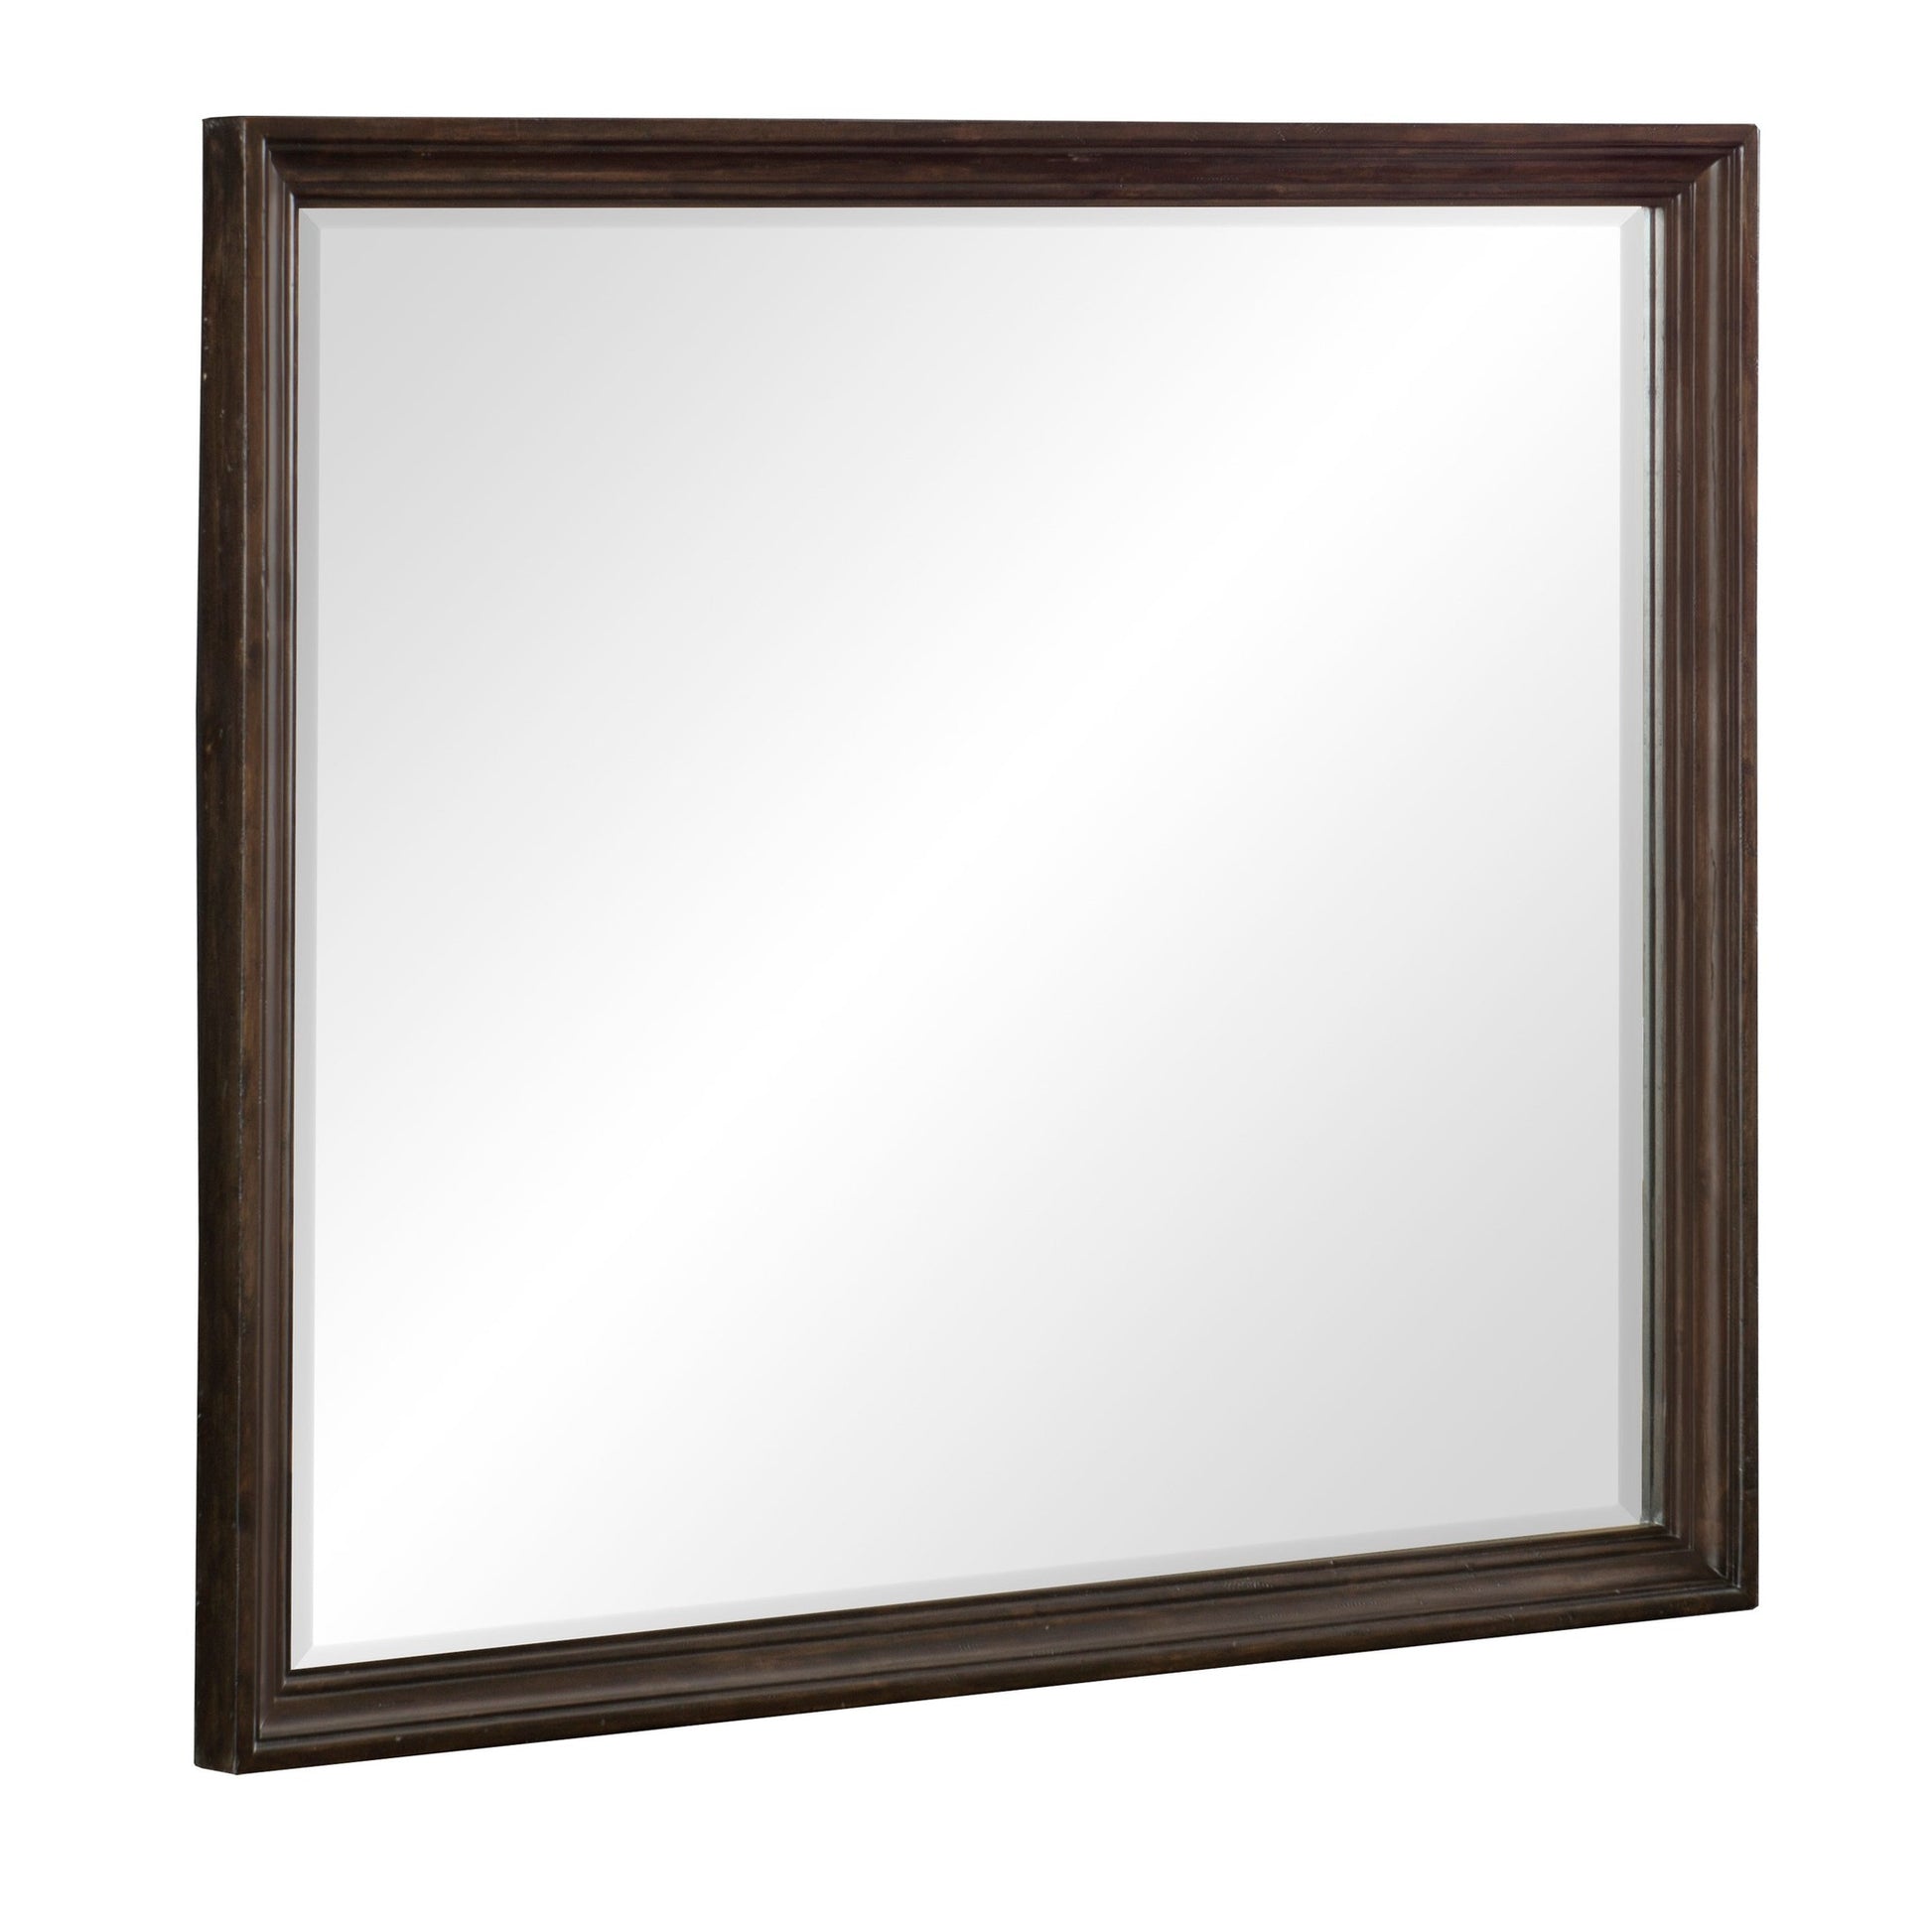 Benzara Brown Wooden Square Mirror With Molded Details and Bevelled Edges